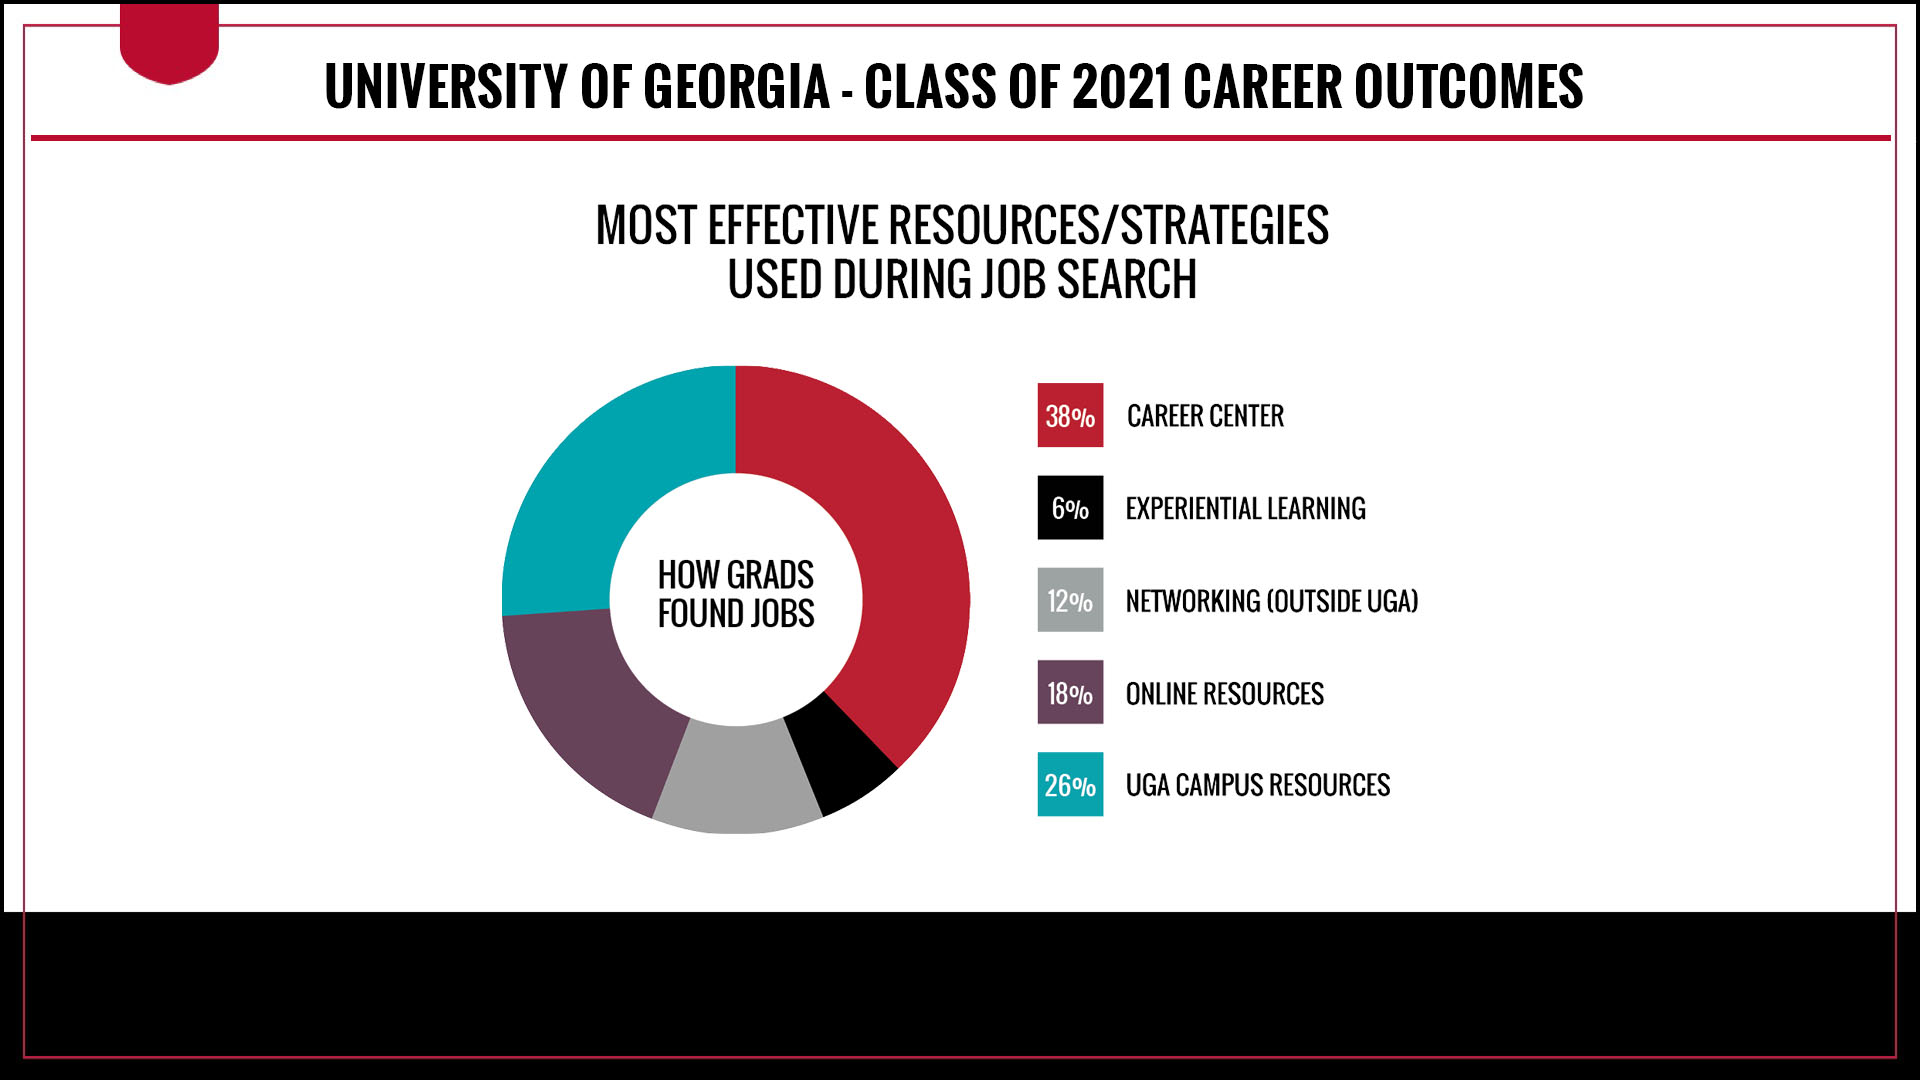 How graduates found jobs - 38% UGA Career Center - 6% Experiential Learning - 12% Networking outside UGA - 18% Online Resources - 26% UGA Campus Resources